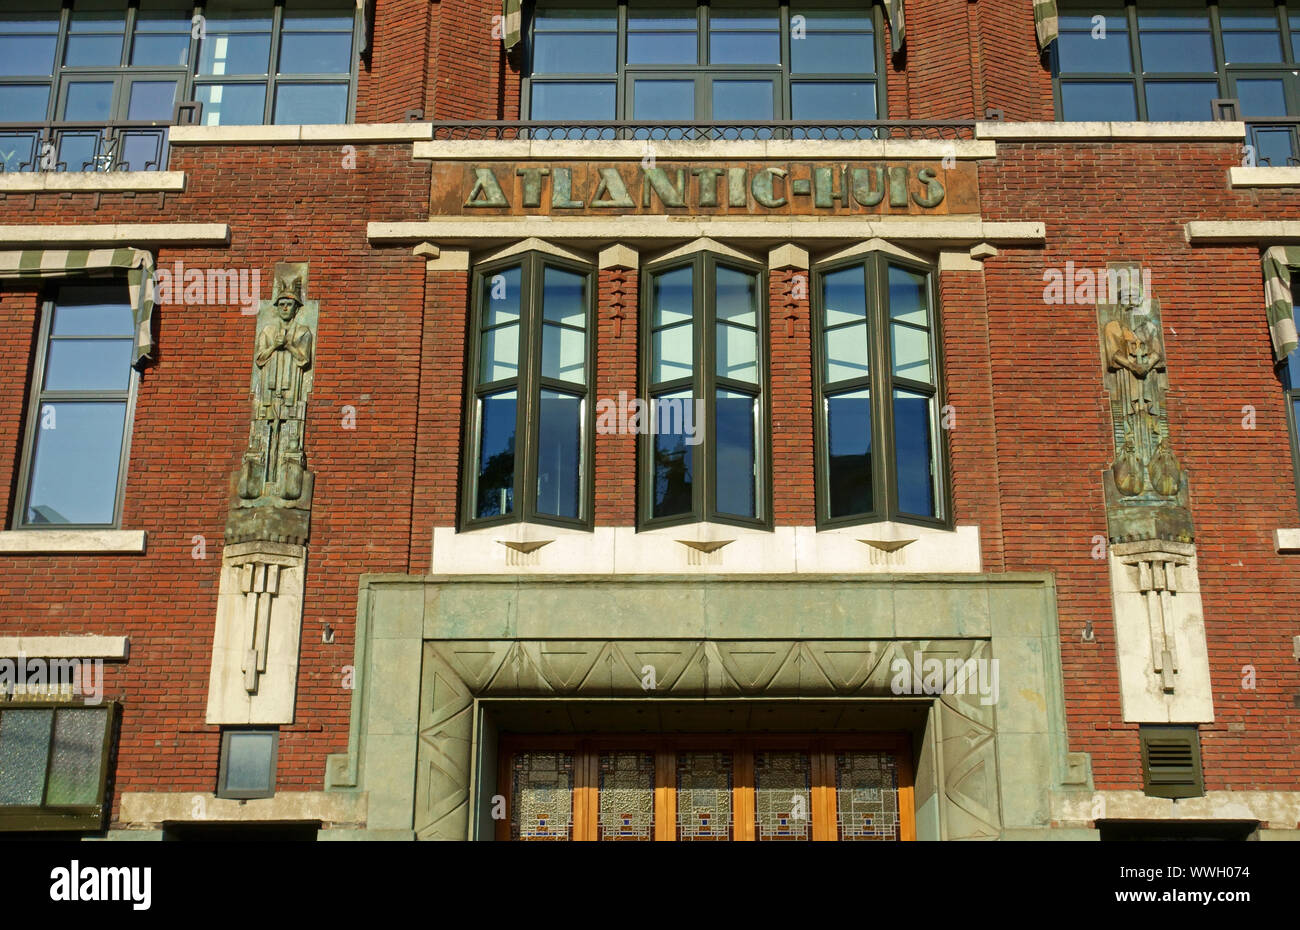 rotterdam, netherlands - 2019.09.08: front facade of the historic atlantic house of 1930 on westplein near veerhaven in the shipping quarter Stock Photo